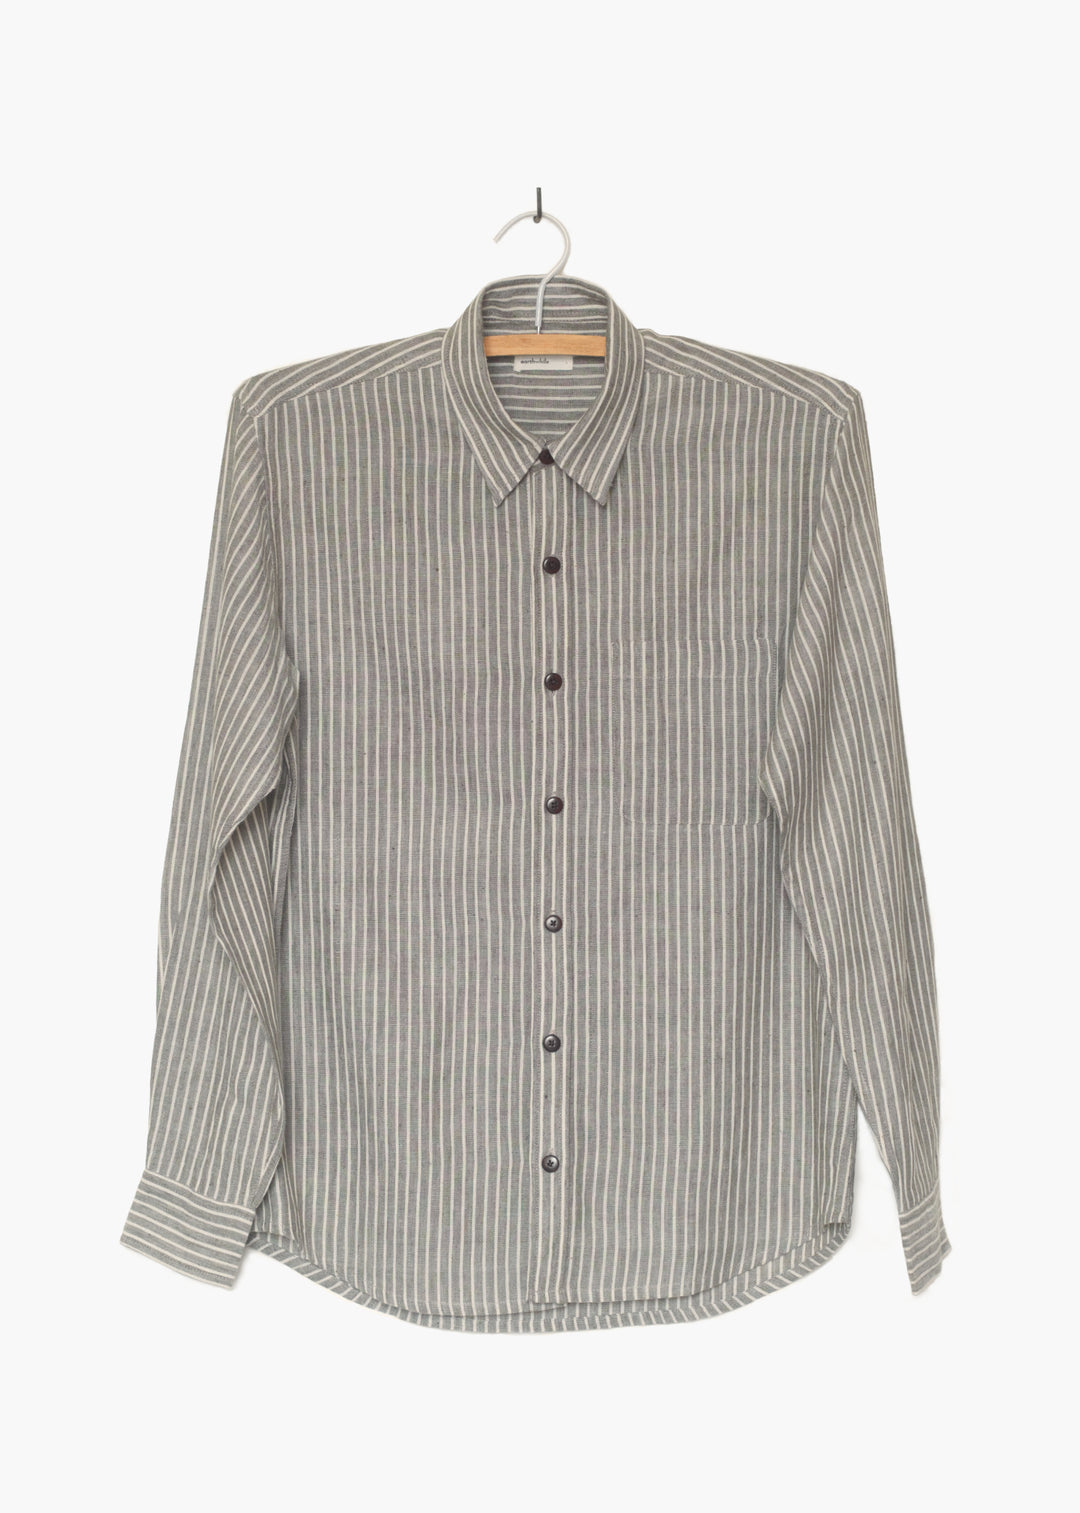 Collared - Stripes on Grey